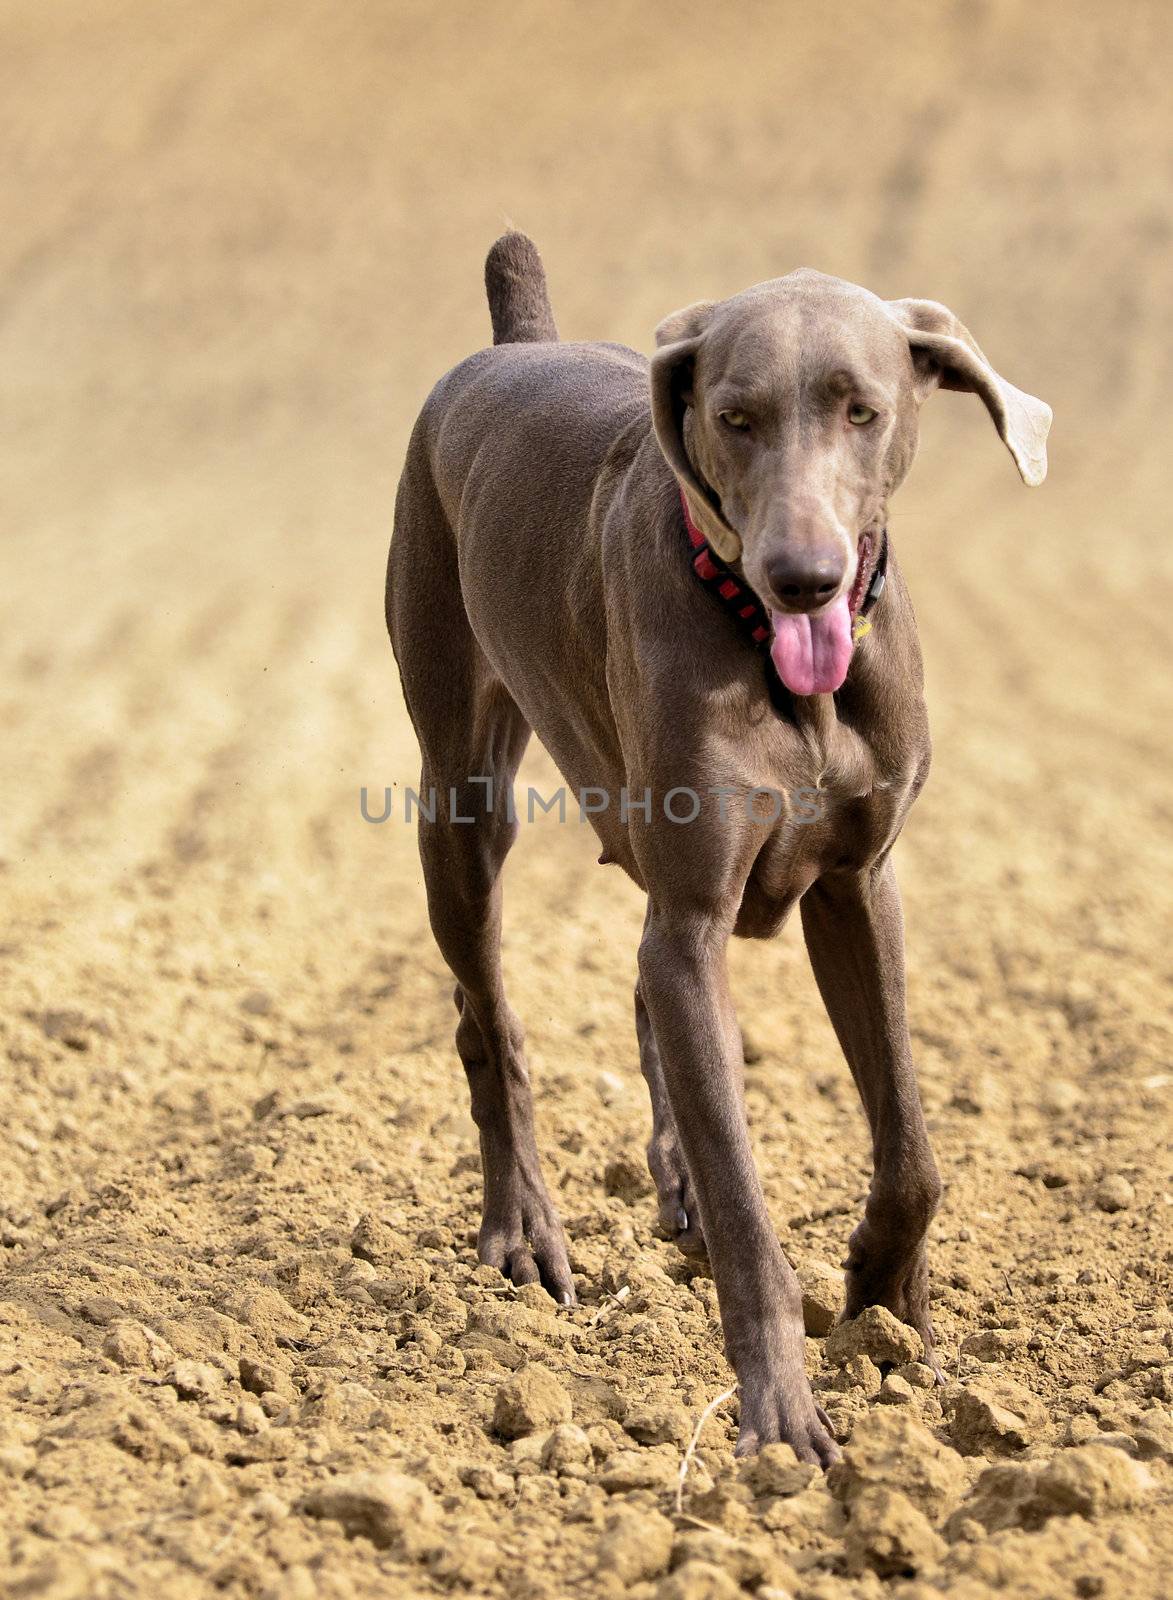 The photo shows Weimaraner in action and fun in the open air.